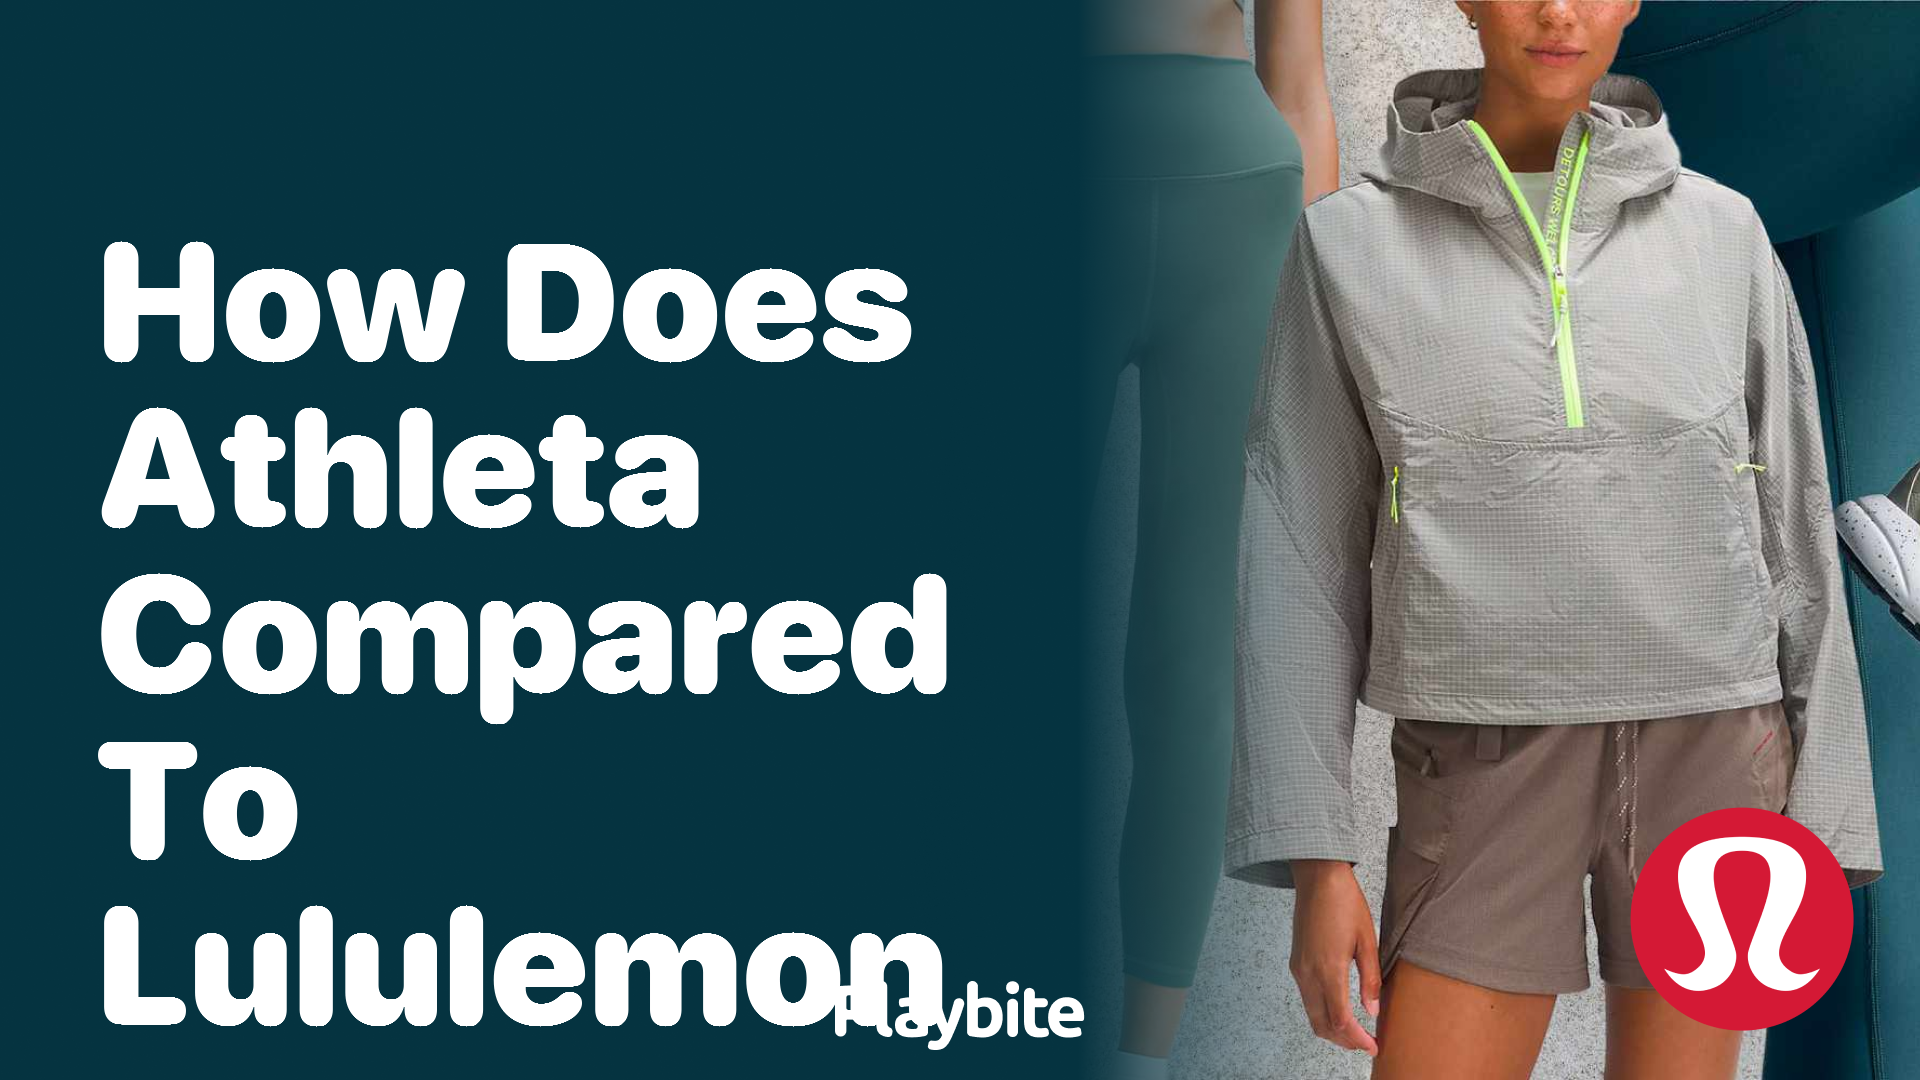 How Does Athleta Compare to Lululemon in Athletic Wear? - Playbite